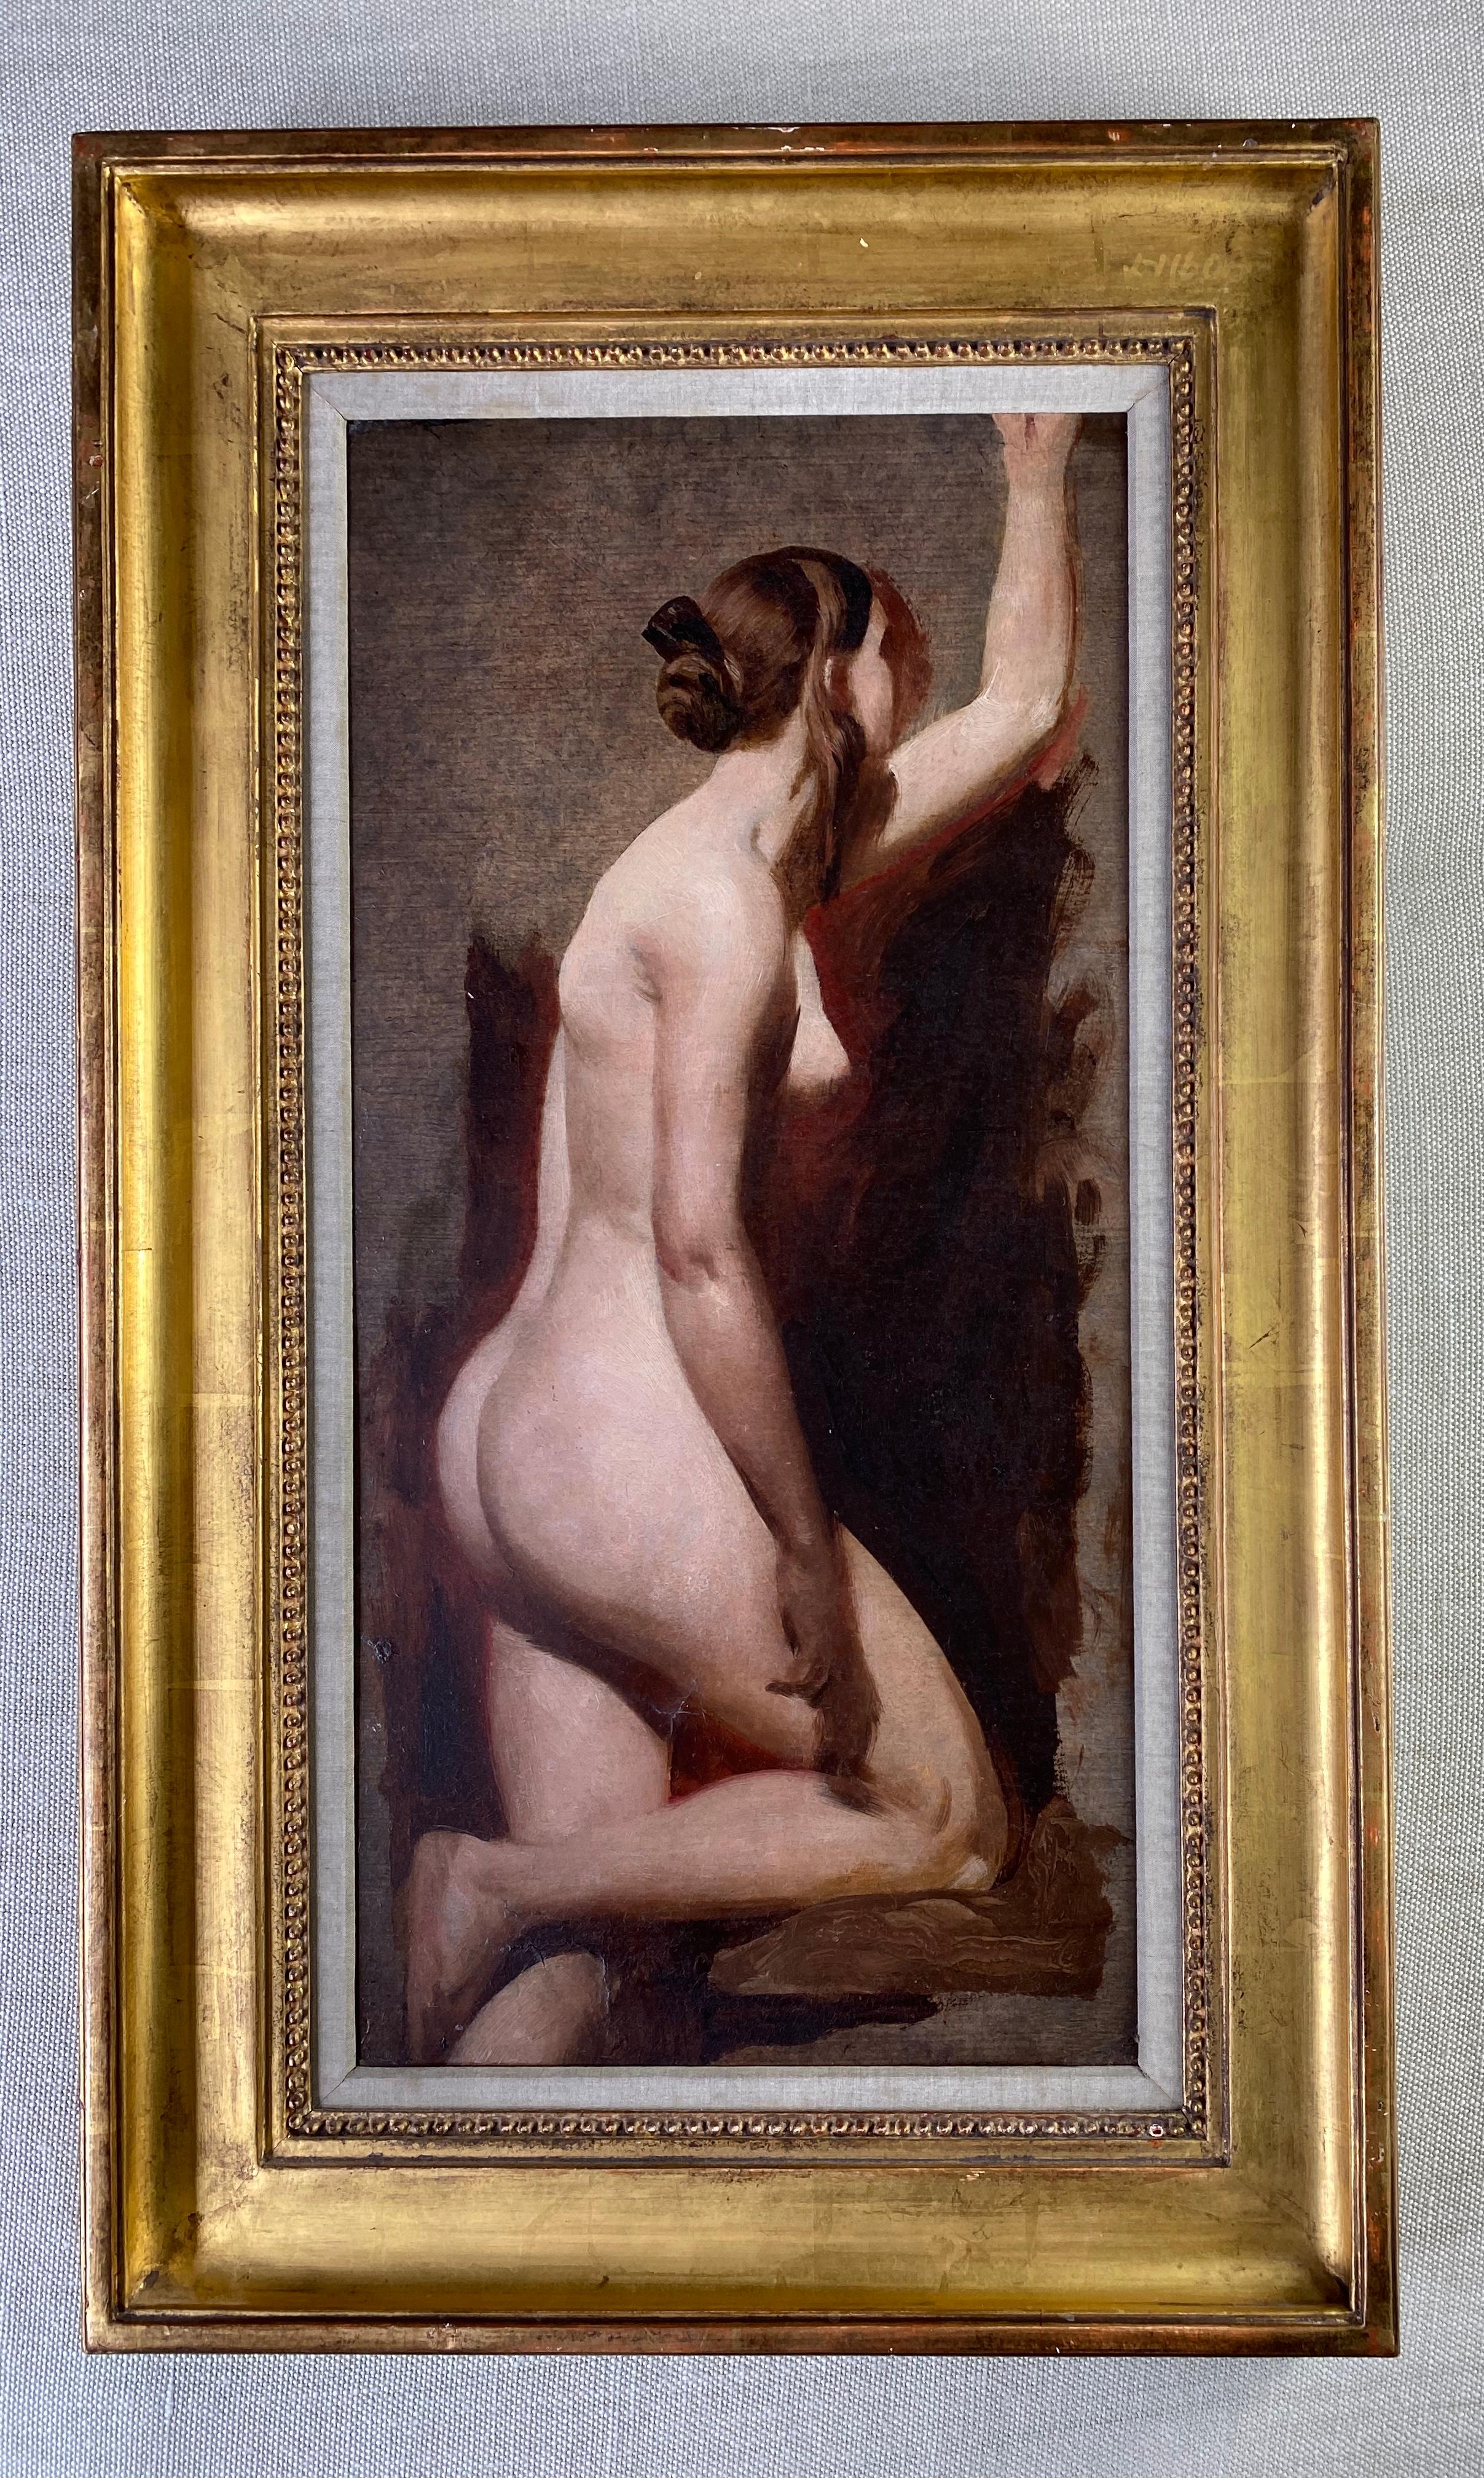 19th Century English Portrait of a Female Nude - Old Masters Painting by William Etty R.A.